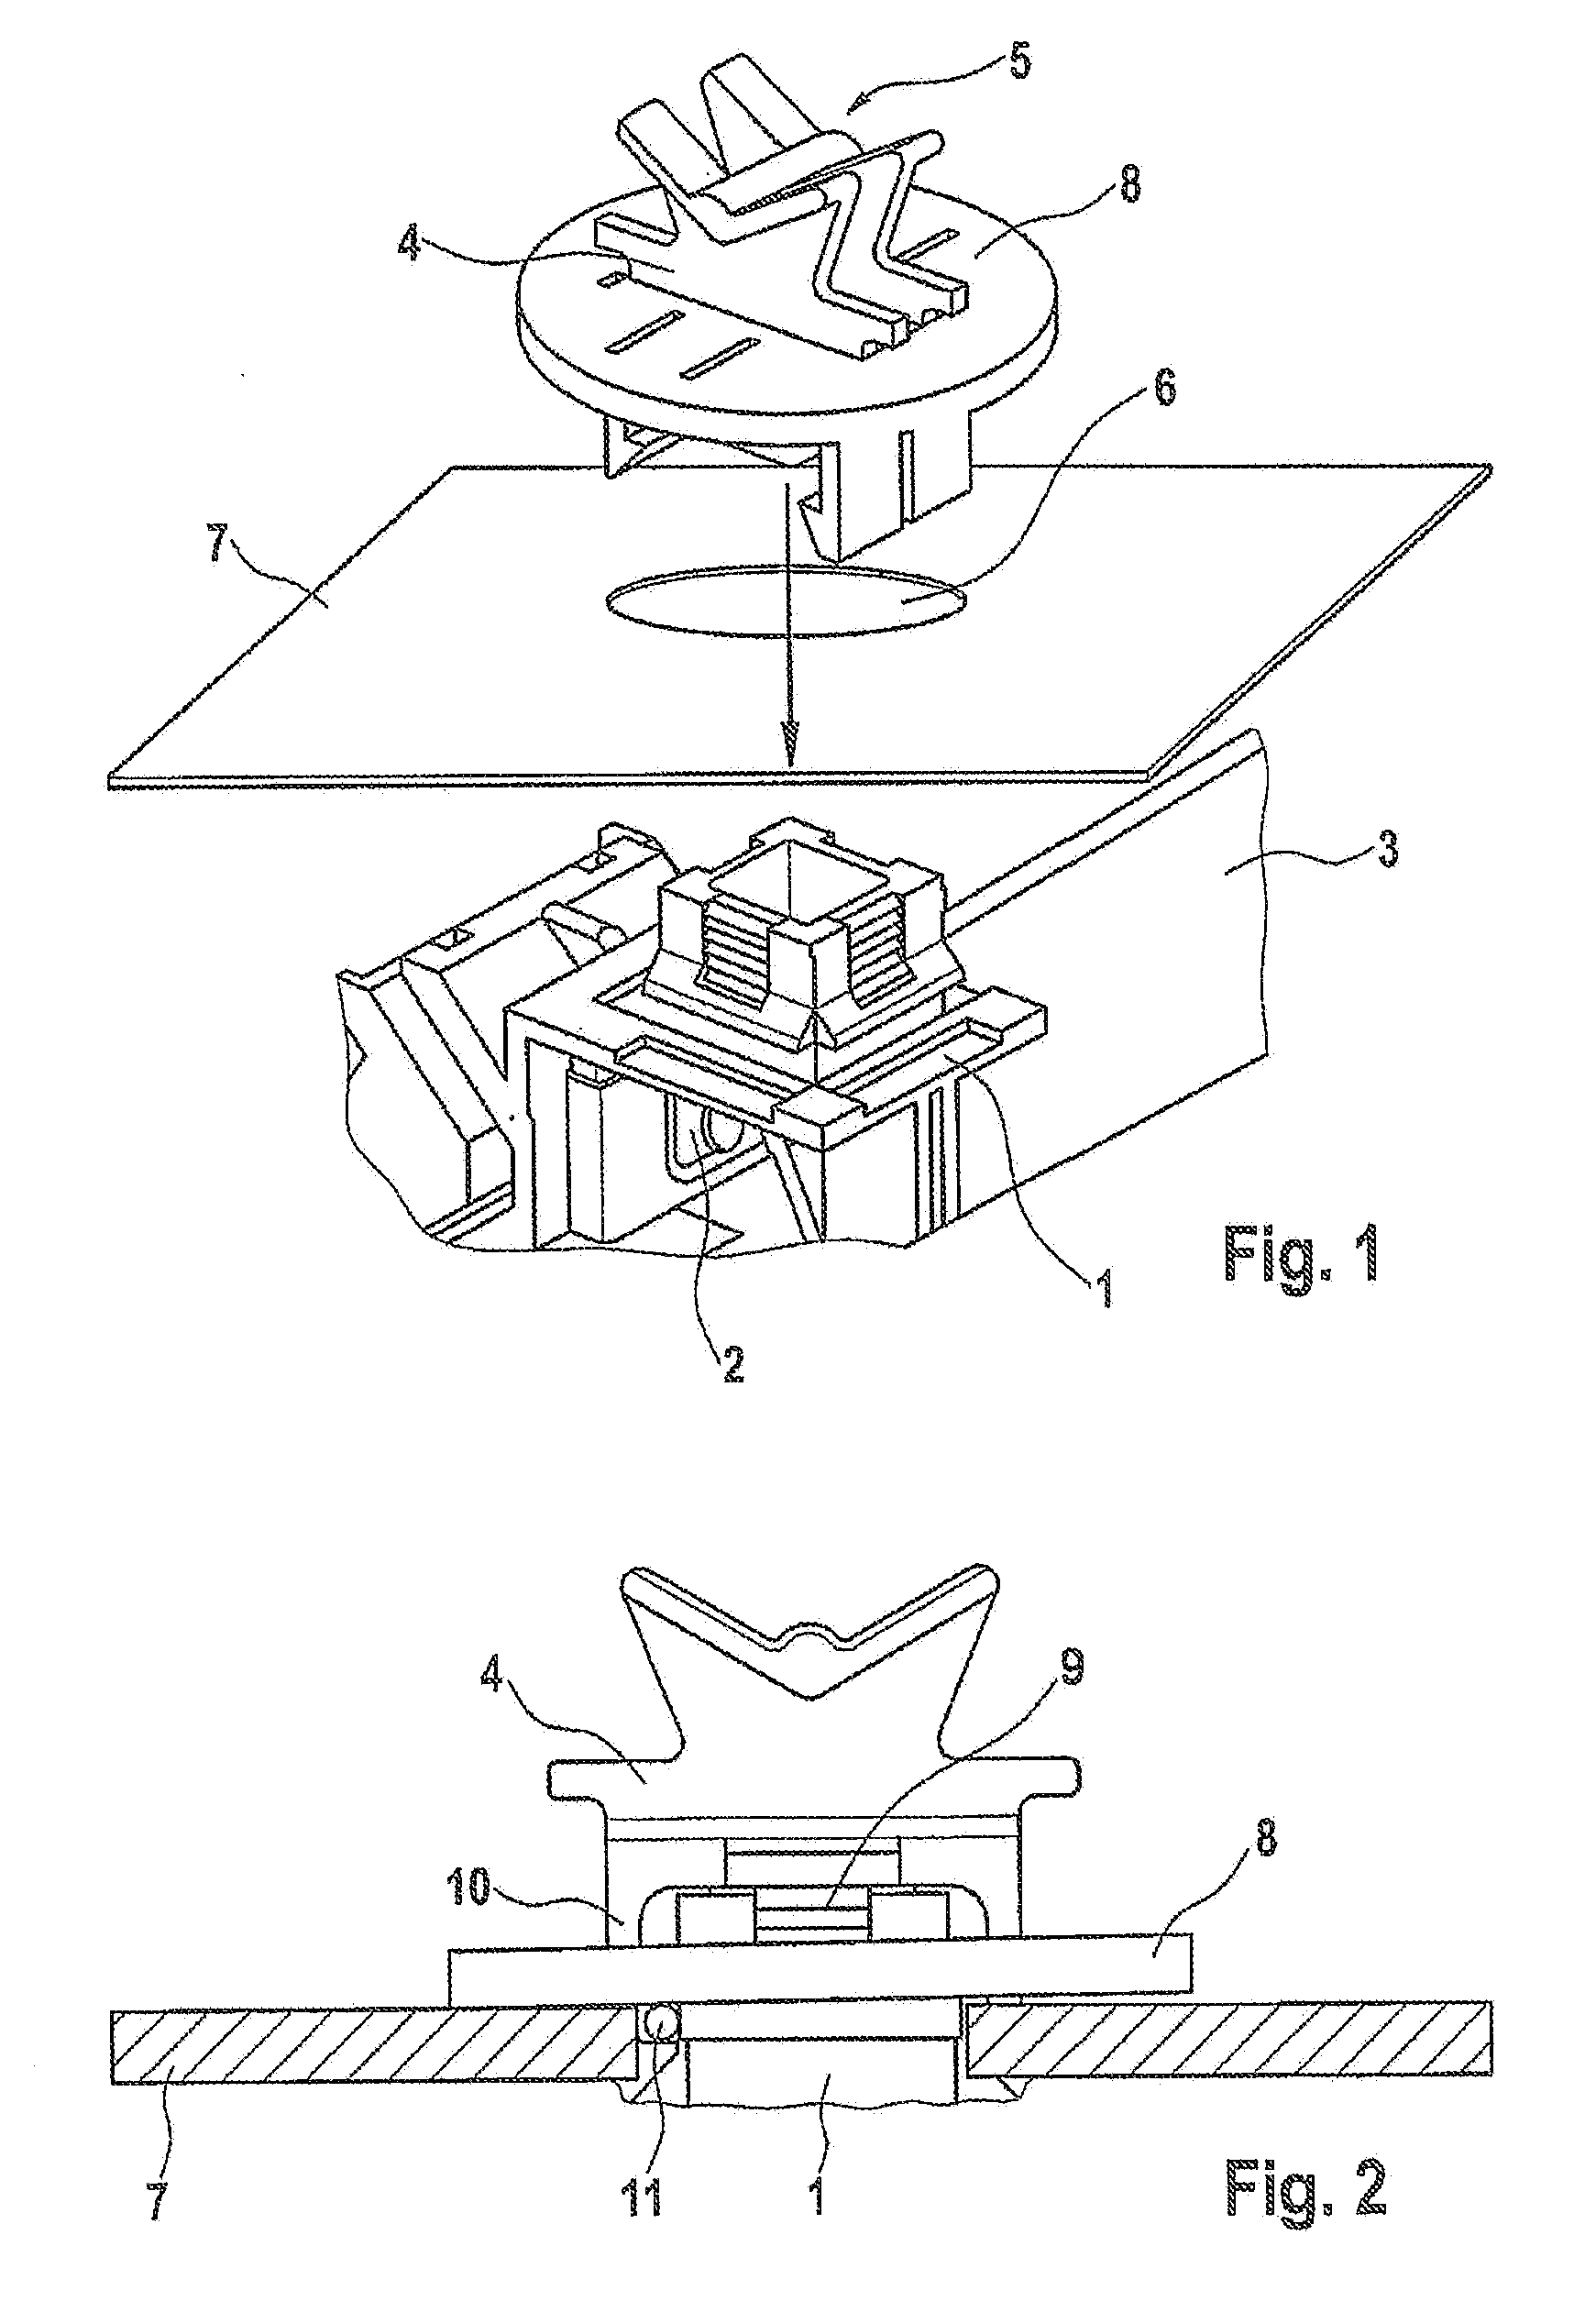 Holding device for mounting parts installed inside an aircraft fuselage